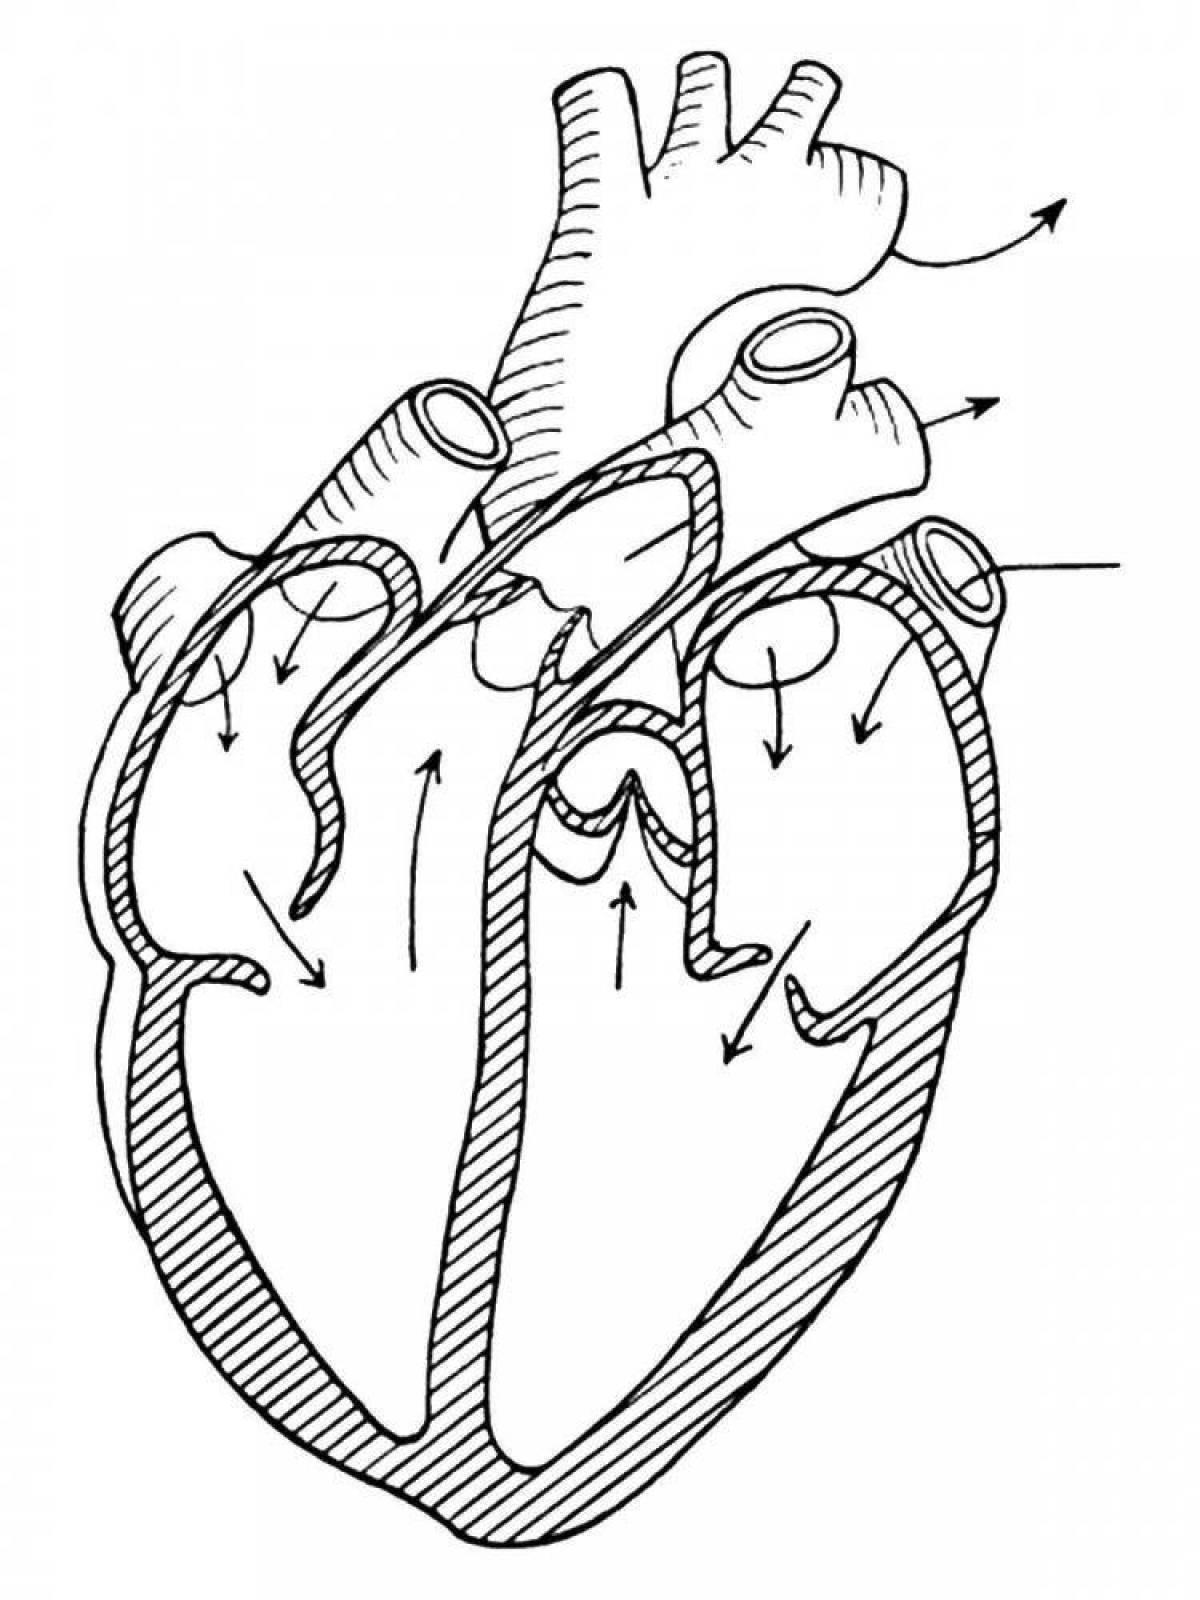 Delightful human heart coloring page